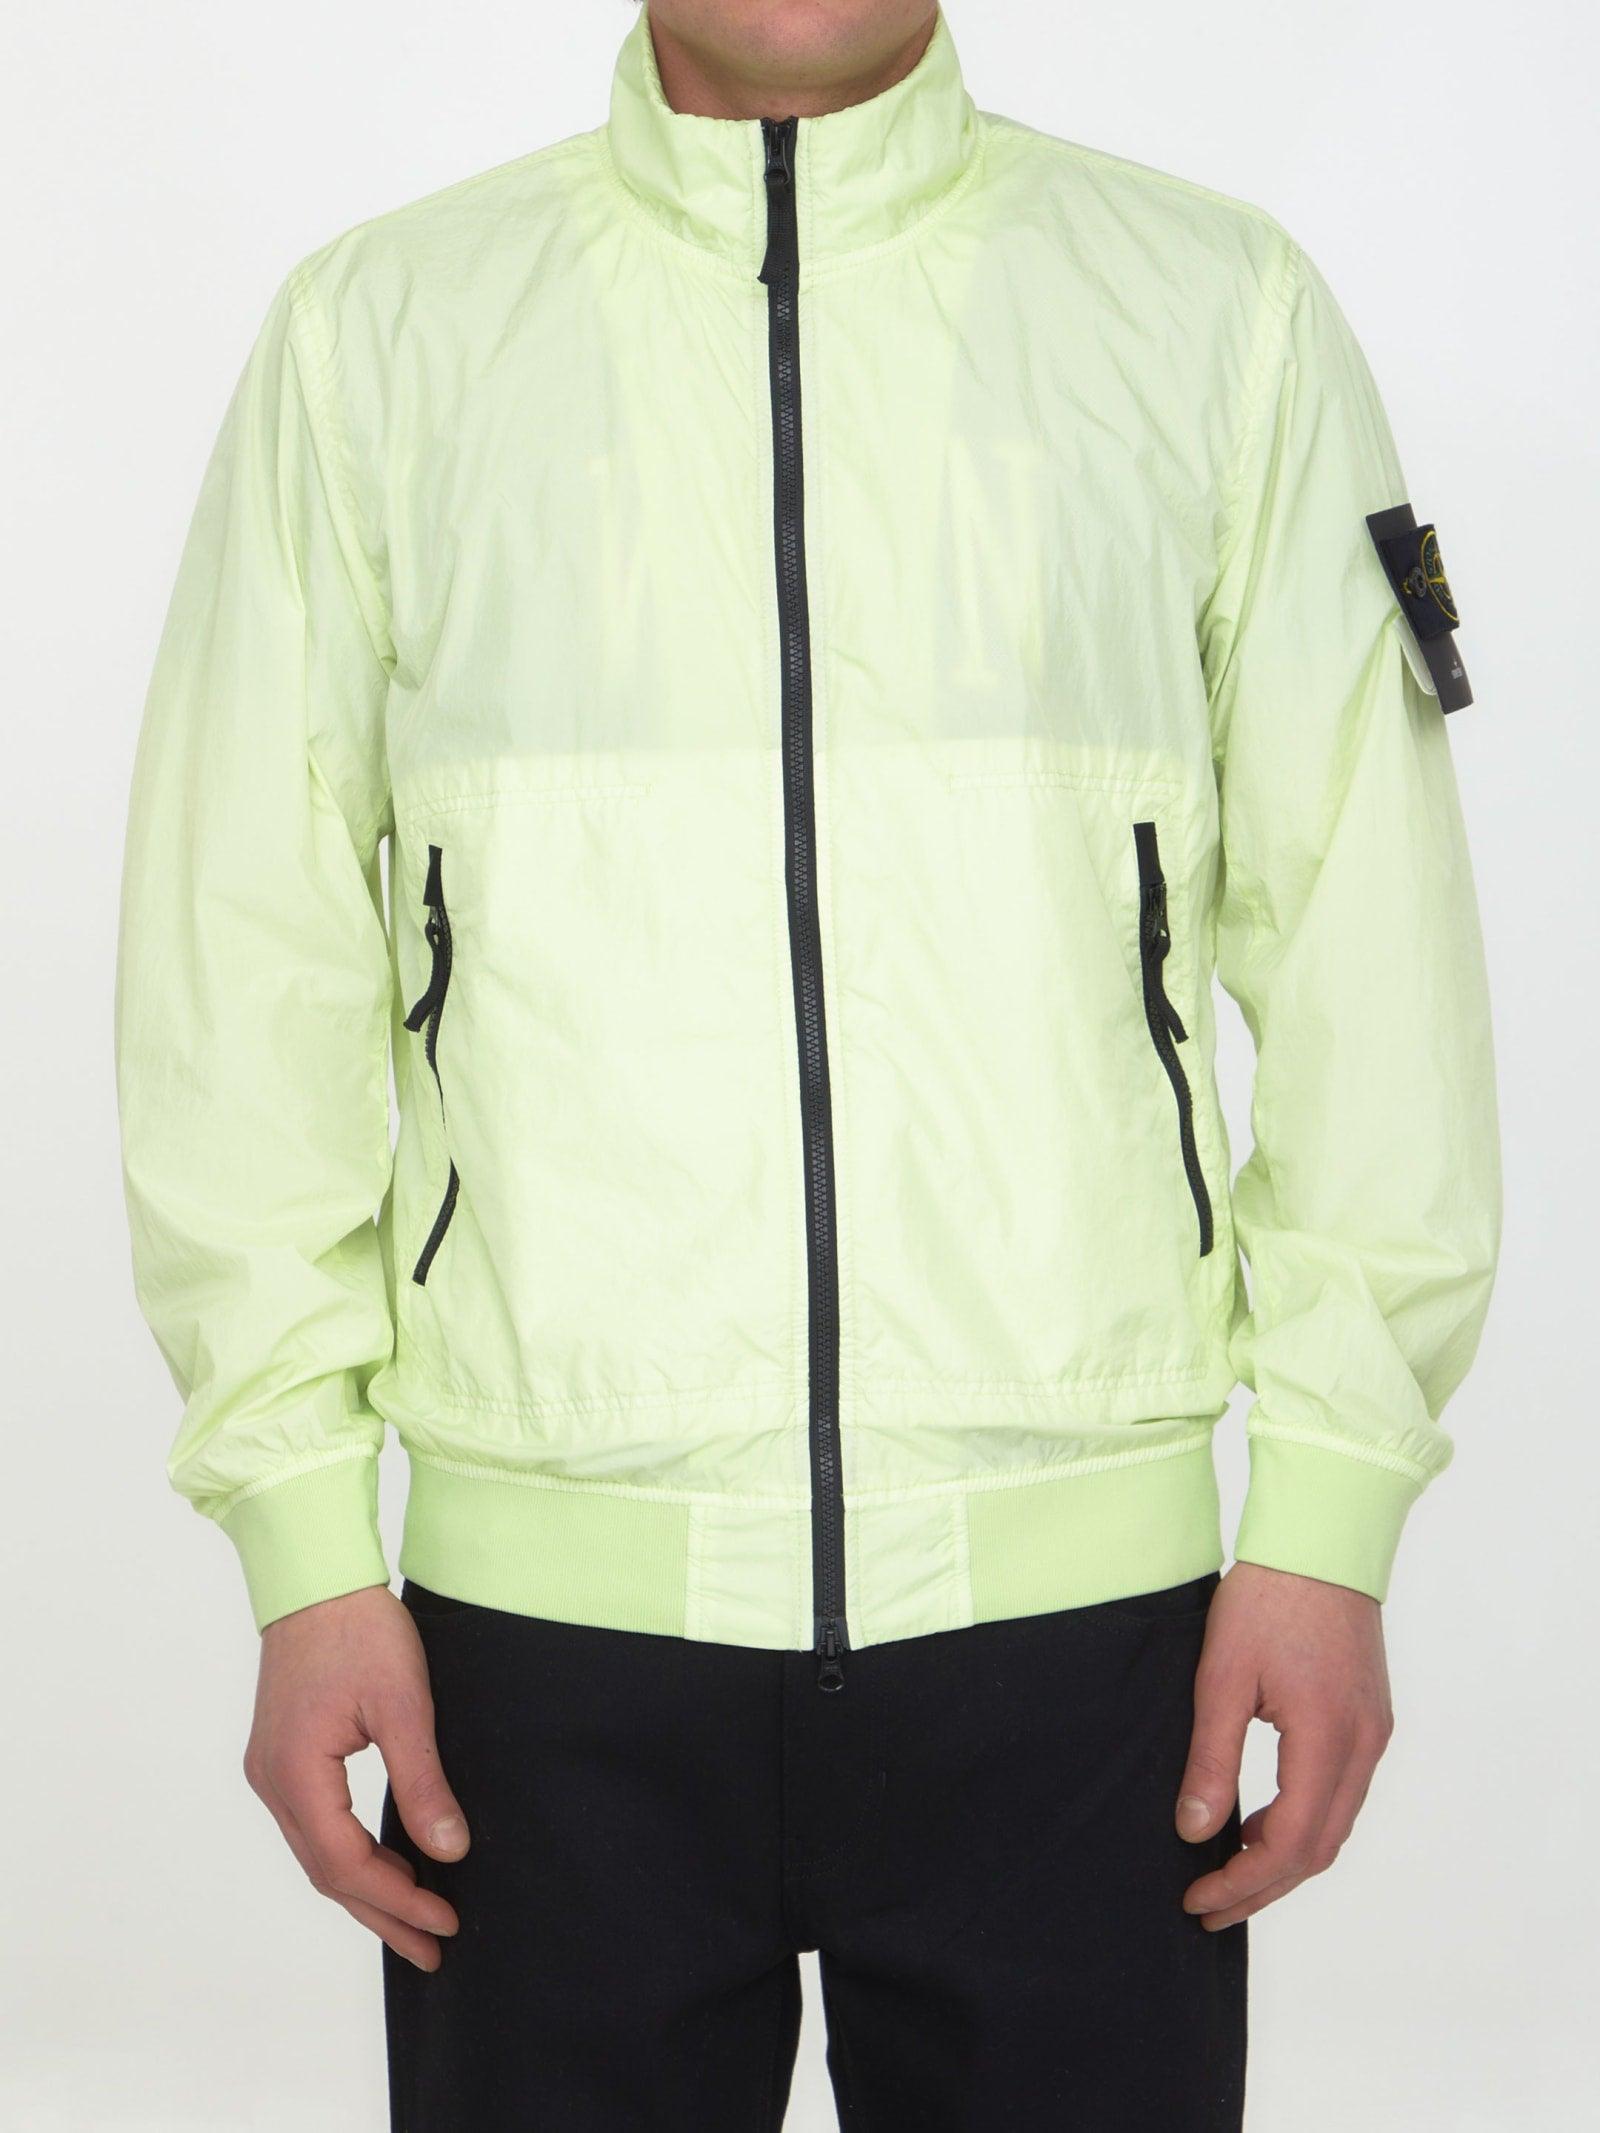 Stone Island Lime Nylon Jacket in Natural for Men | Lyst